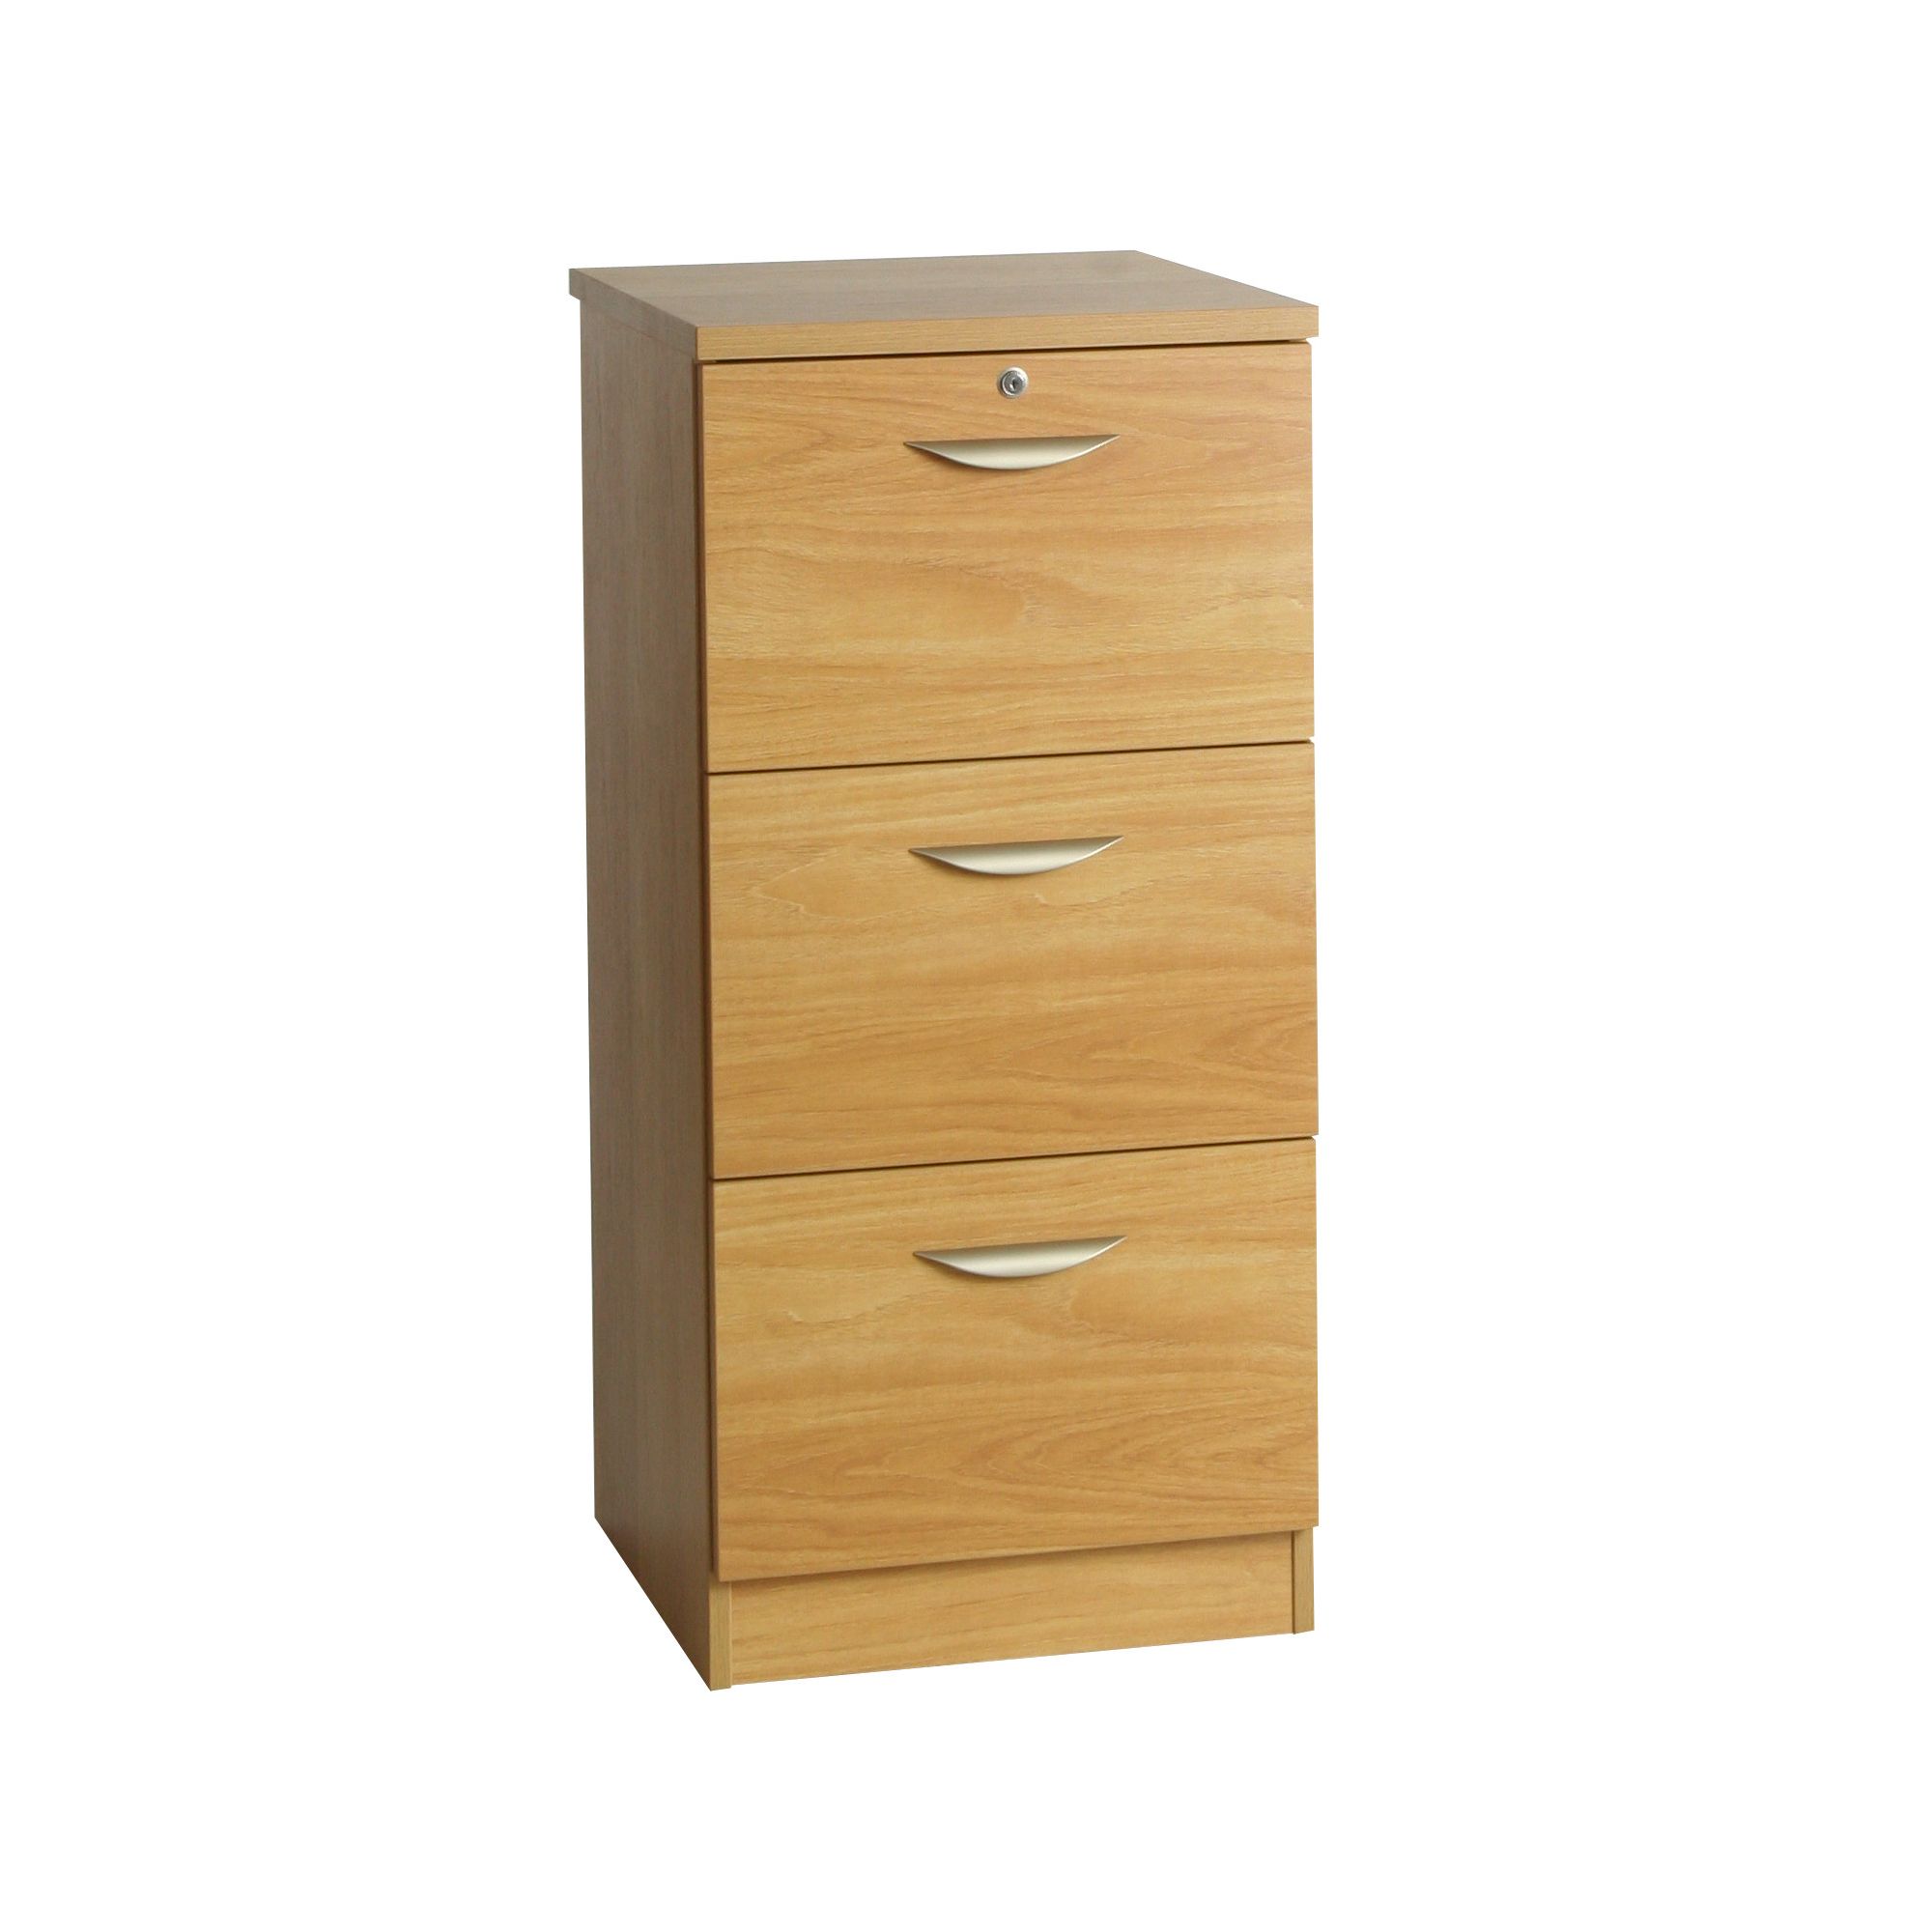 Enduro Three Drawer Tall Wooden Filing Cabinet - Beech at Tesco Direct